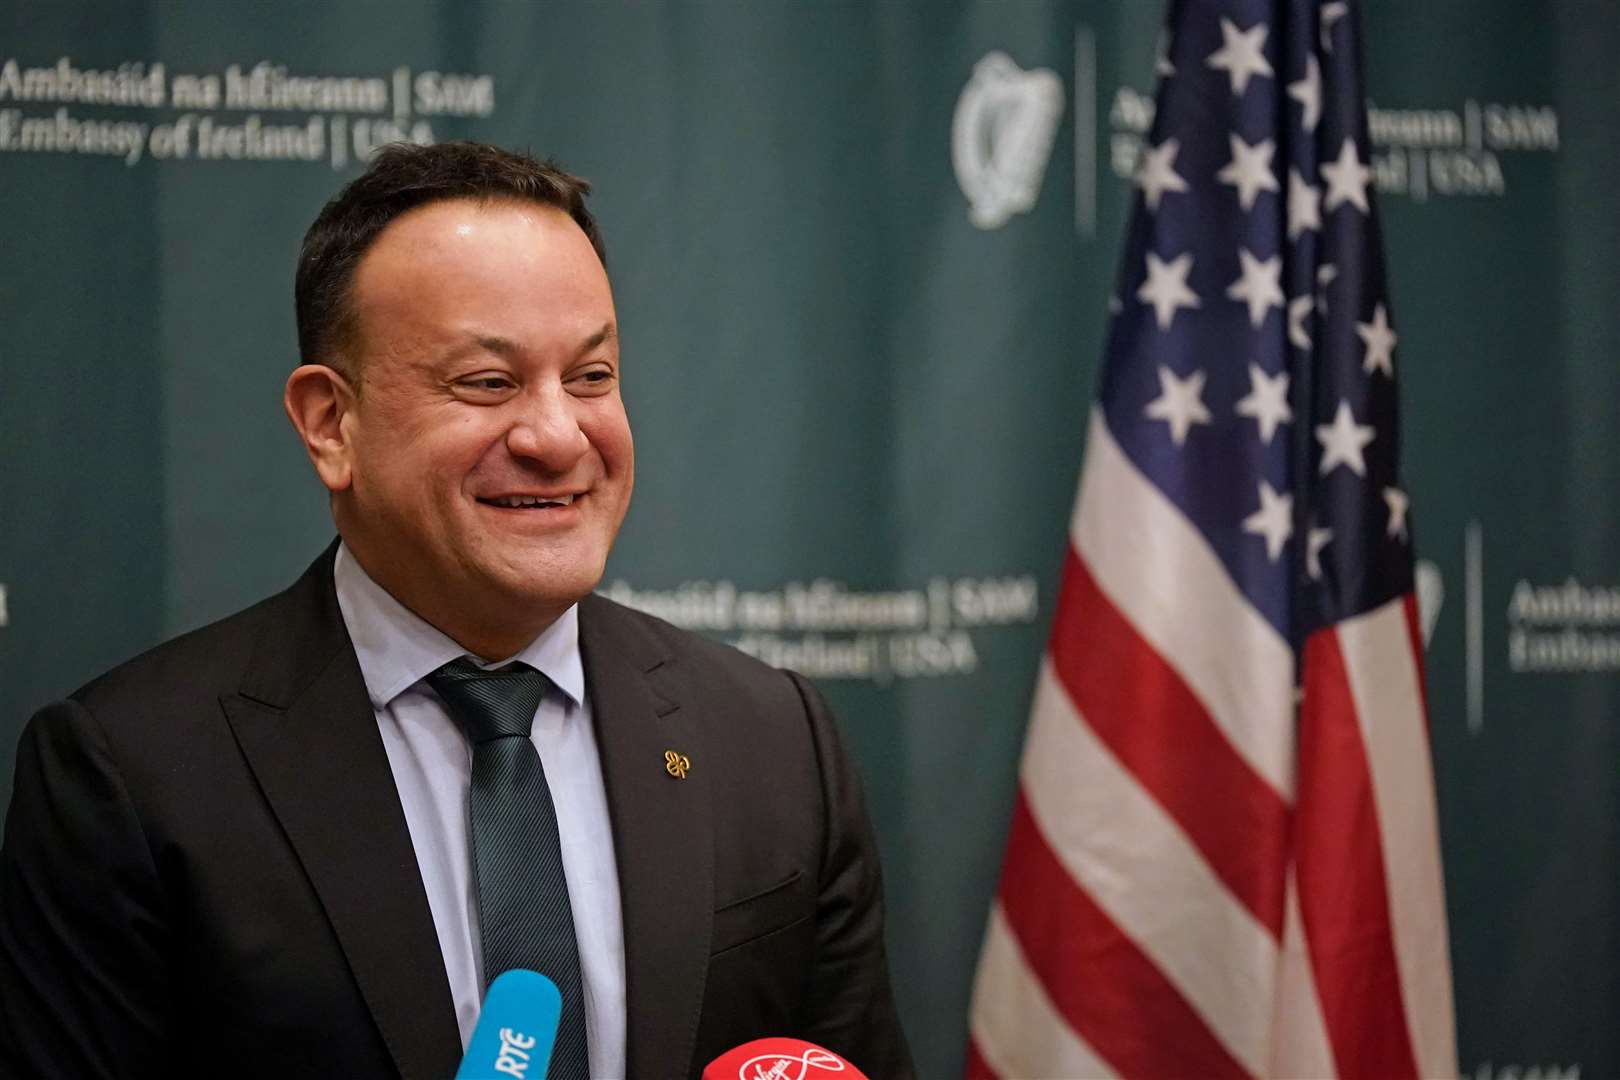 Taoiseach Leo Varadkar speaks to the media at the Salamander Hotel, in Washington, DC, during his visit to the US for St Patrick’s Day (Niall Carson/PA)